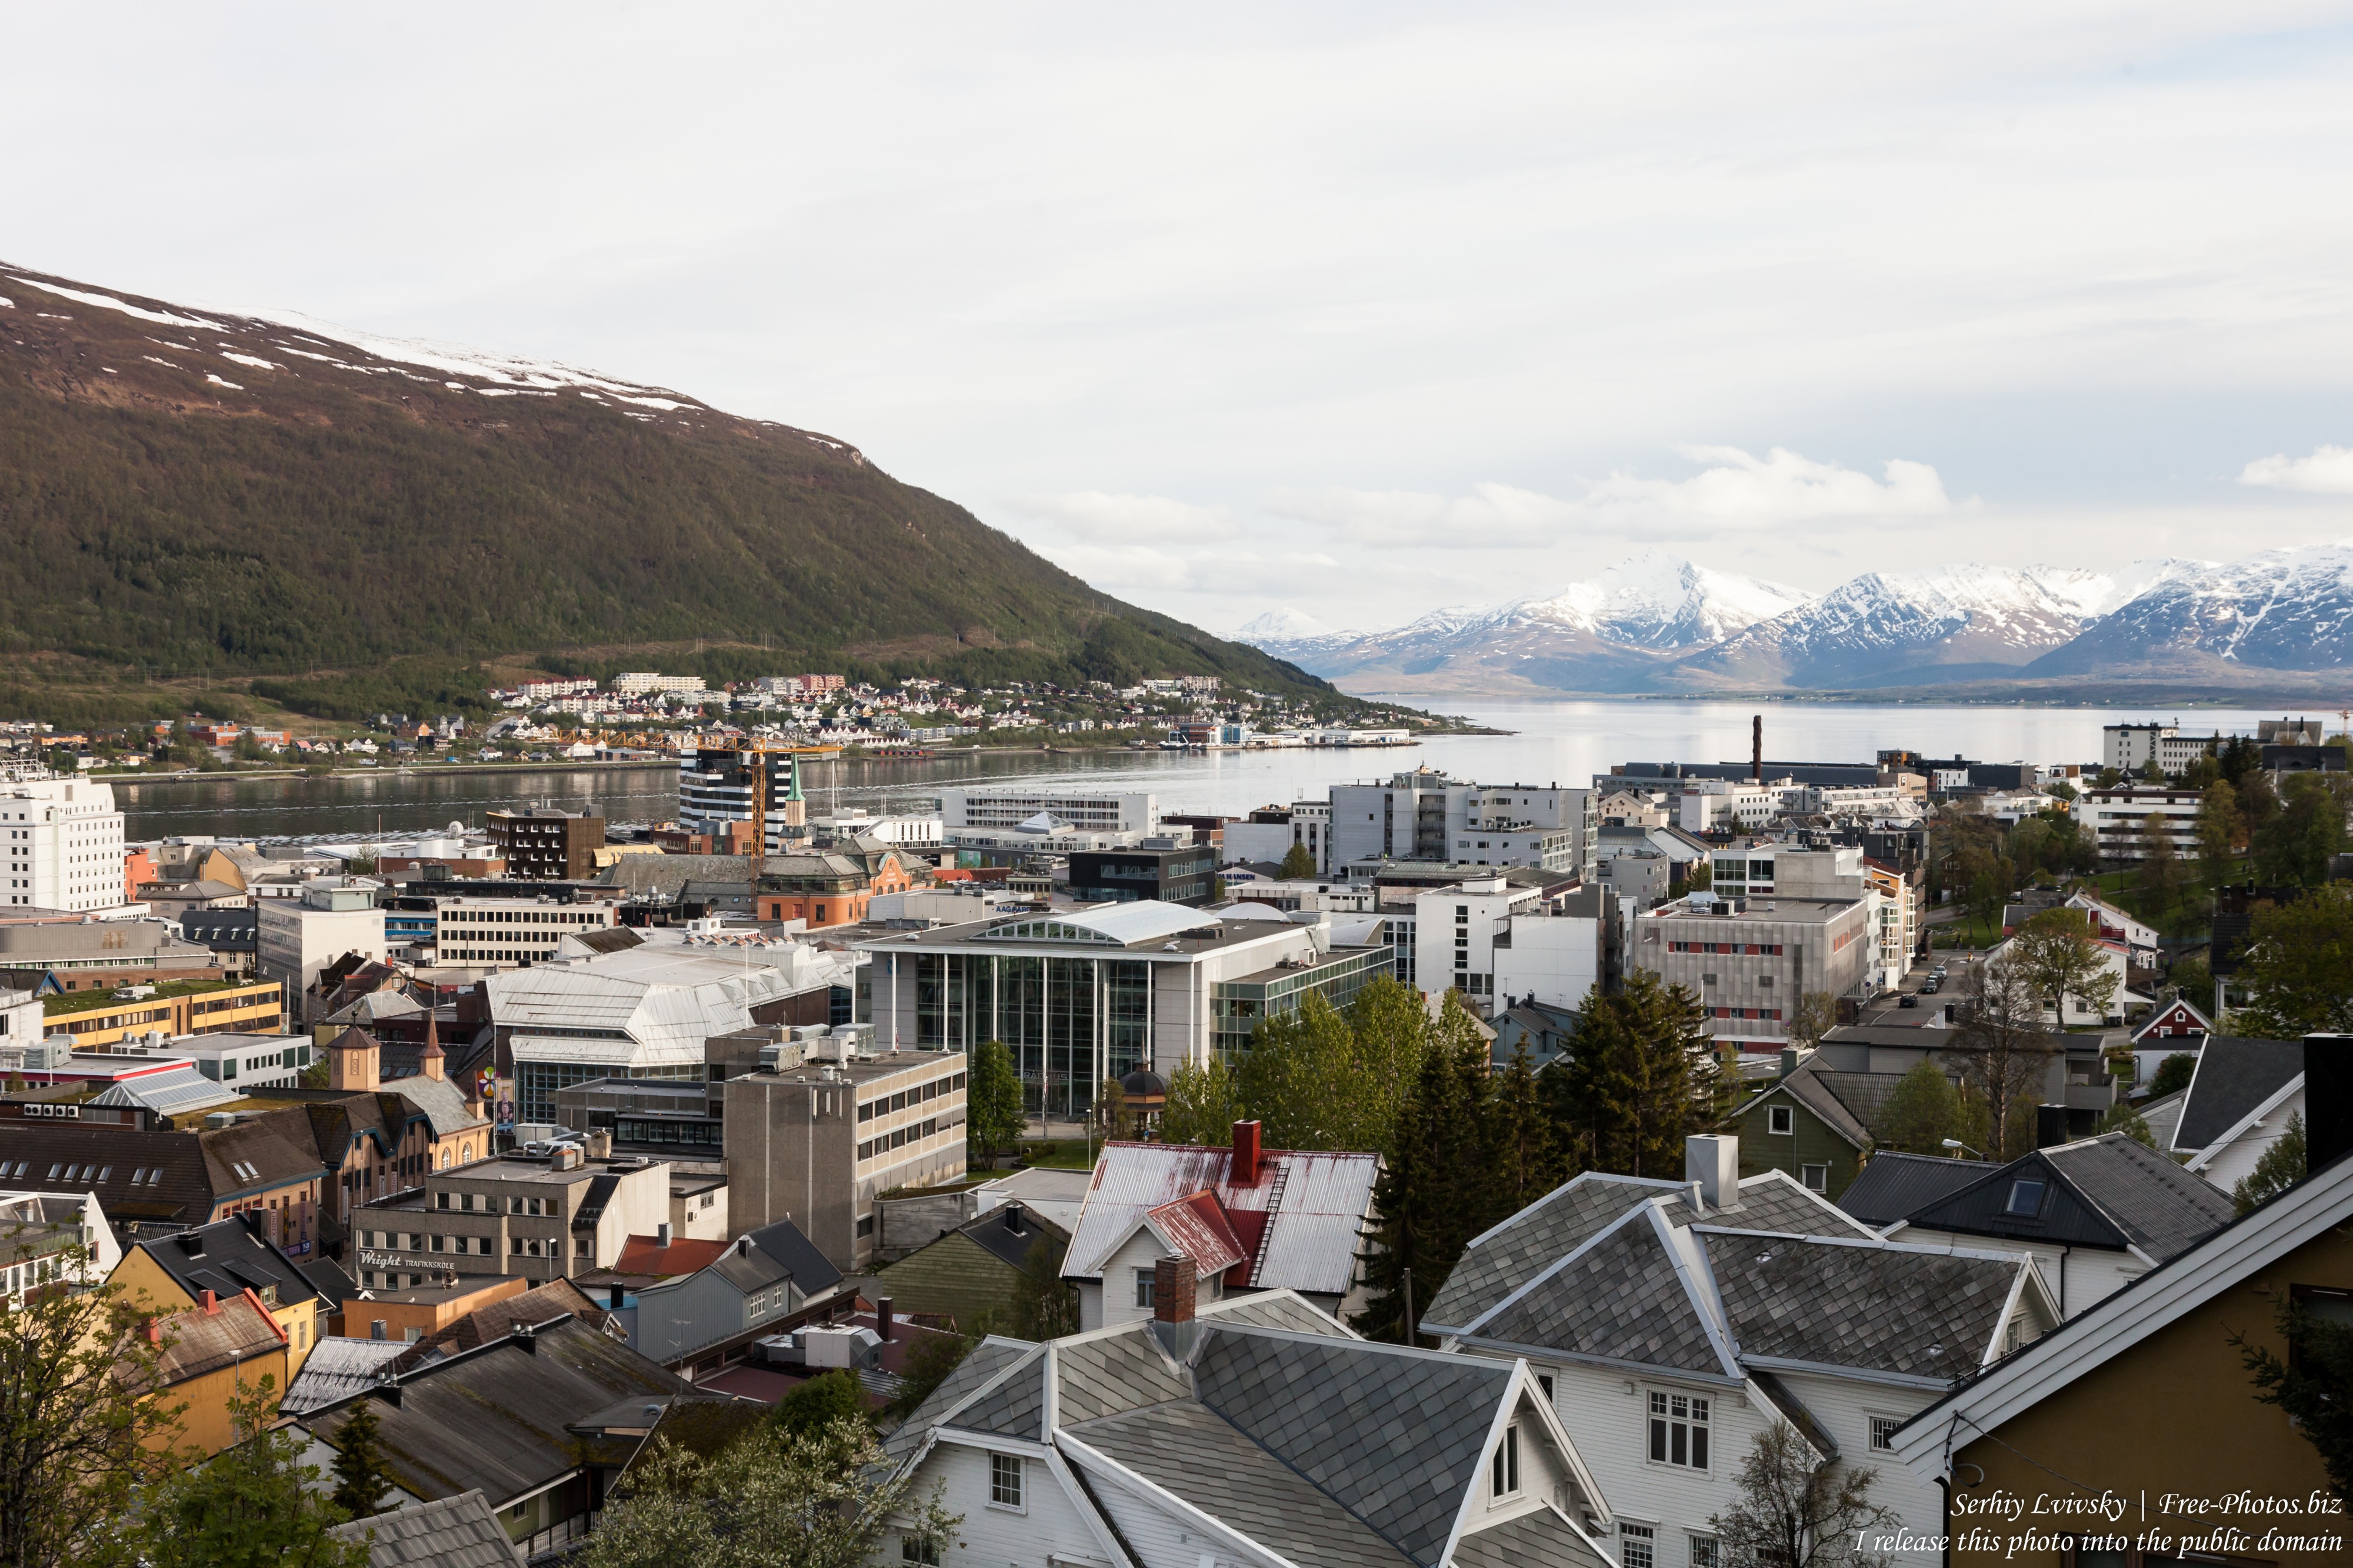 Tromso, Norway, photographed in June 2018 by Serhiy Lvivsky, picture 73